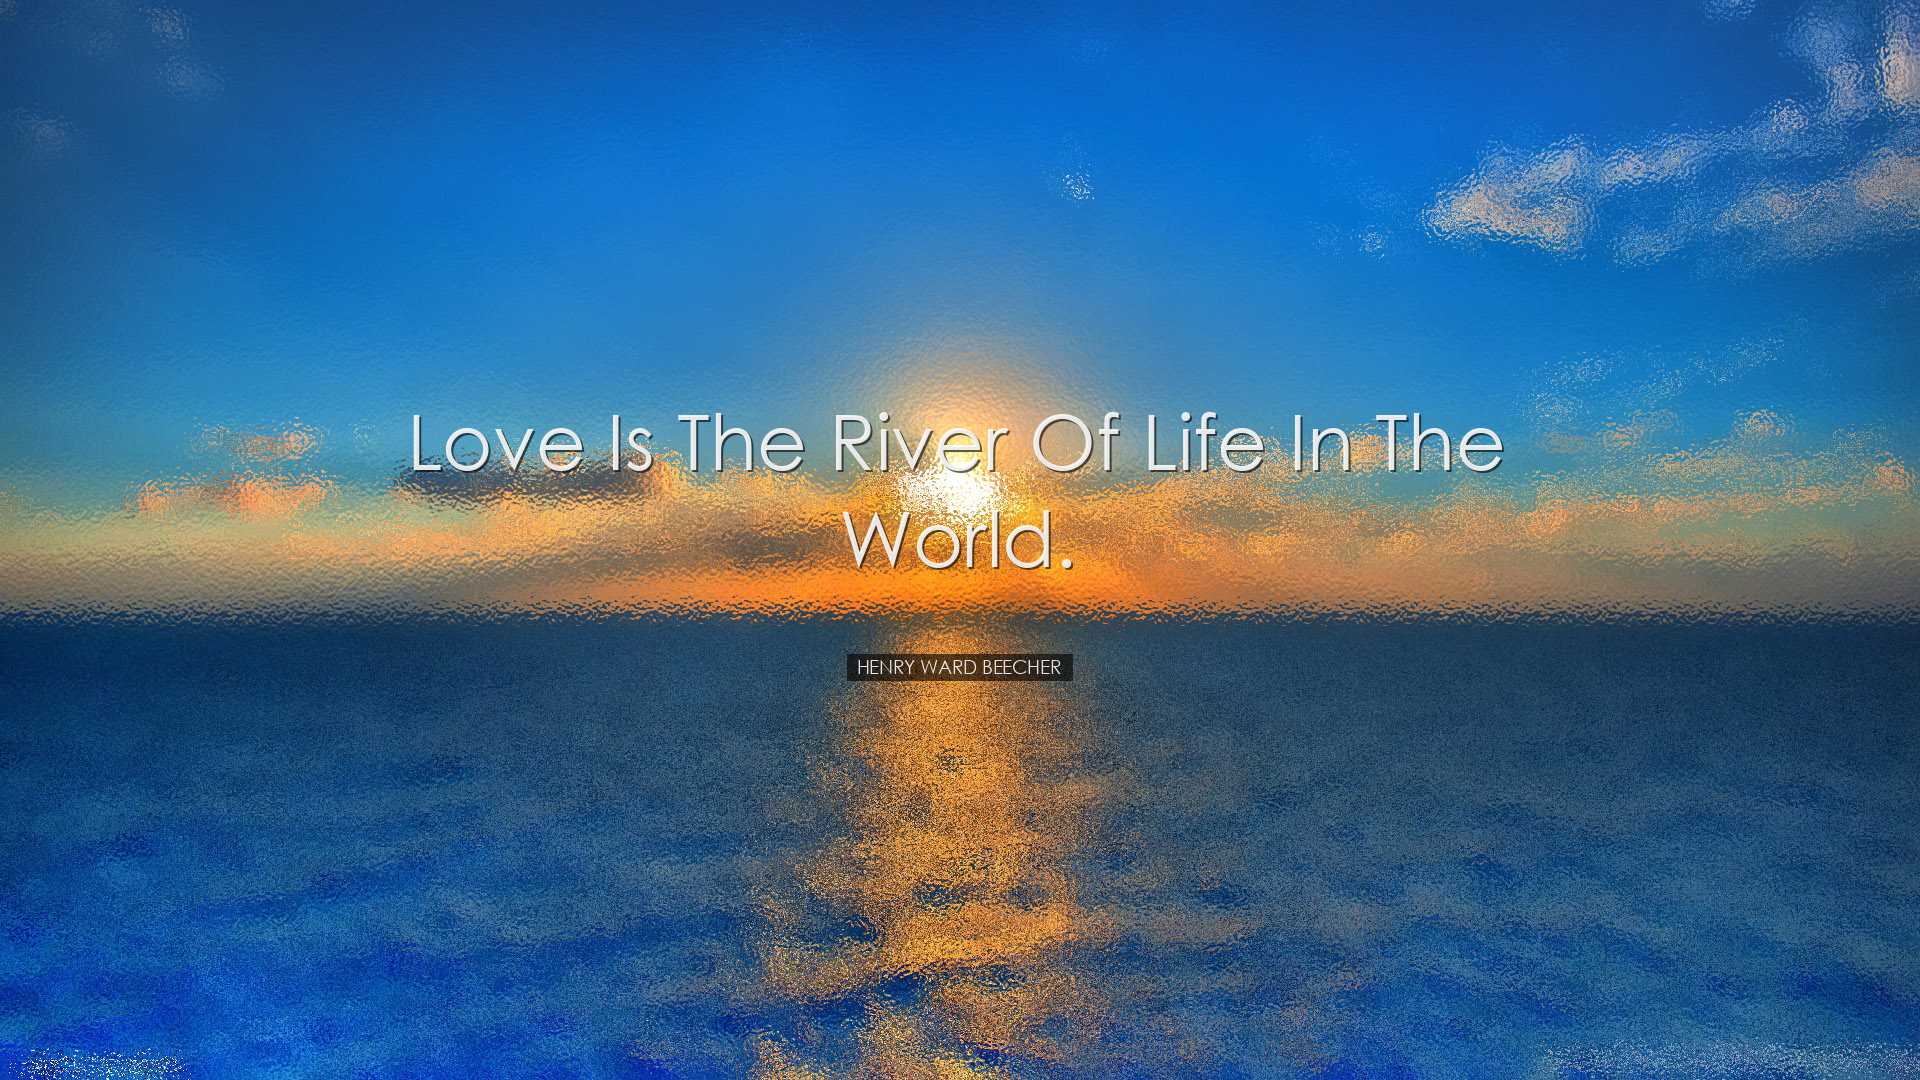 Love is the river of life in the world. - Henry Ward Beecher